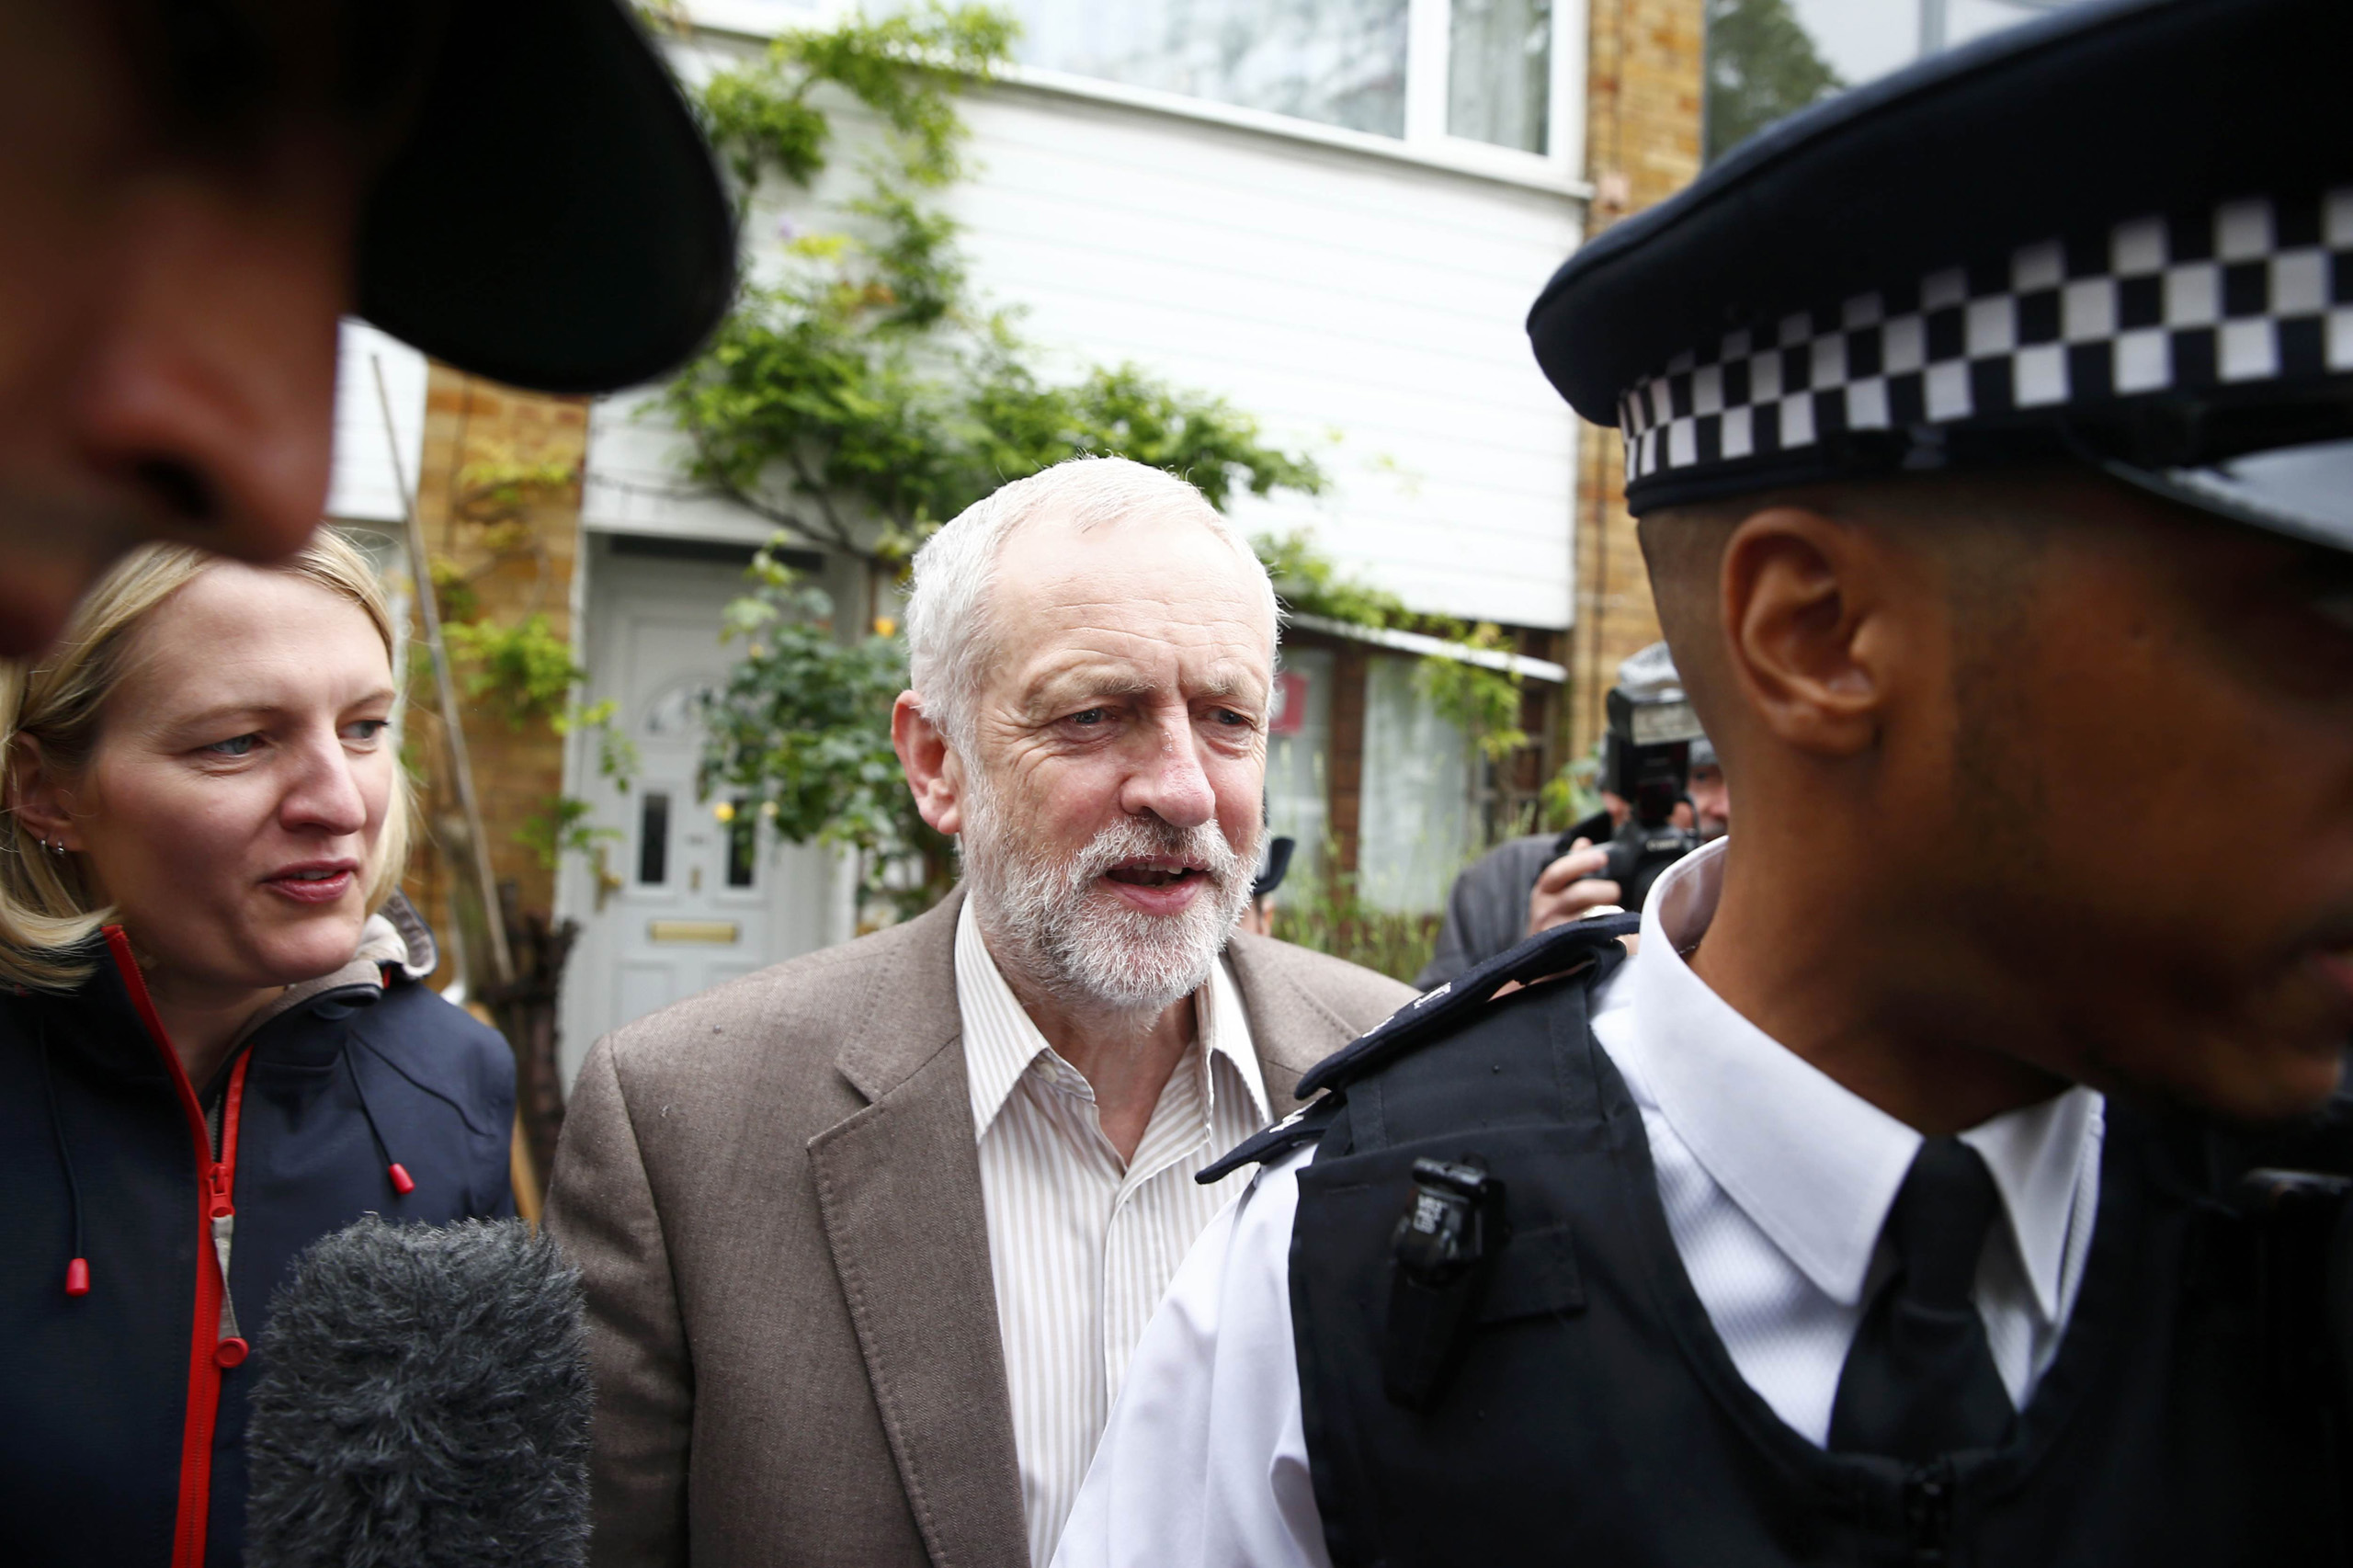 The leader of Britain's opposition Labour party, Jeremy Corbyn, leaves his home in London on June 27, 2016. (Neil Hall—Reuters)